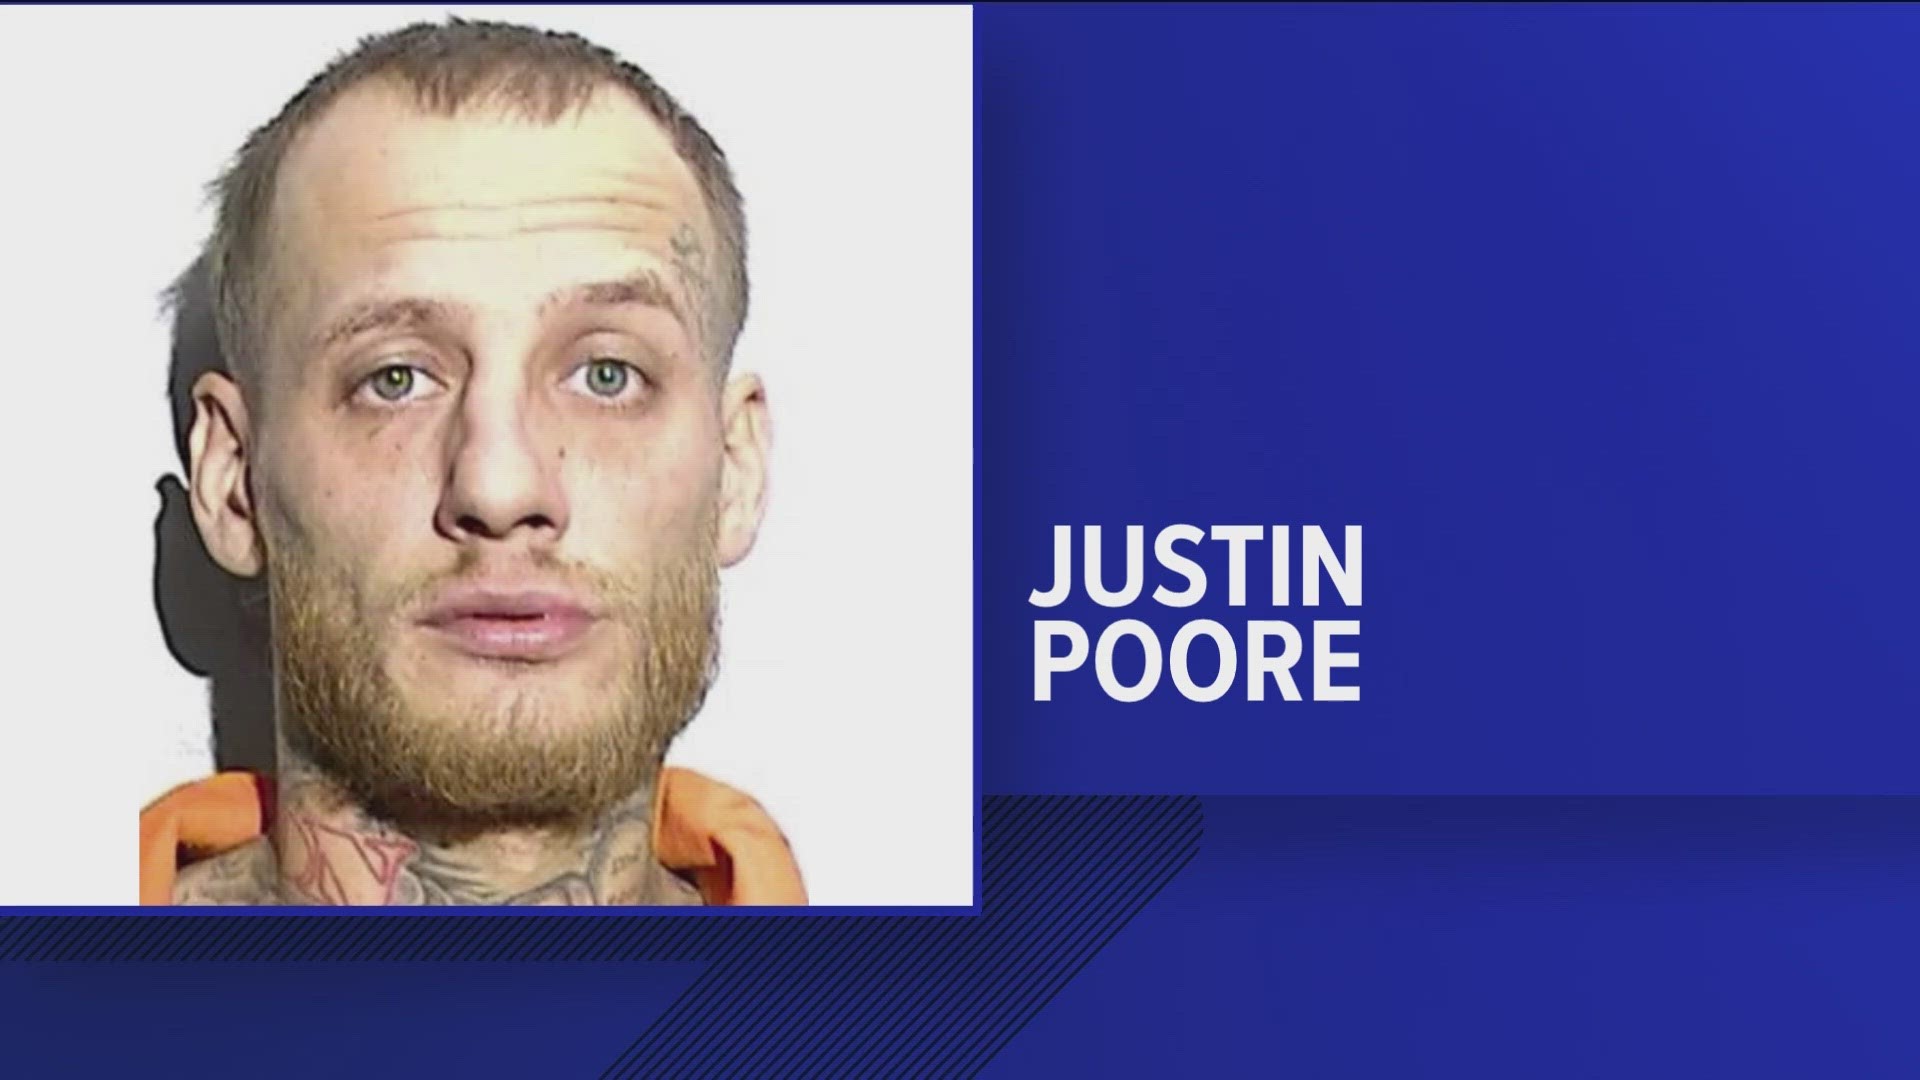 Justin Poore is wanted on a felonious assault charge for an incident that occurred on Nov. 9.